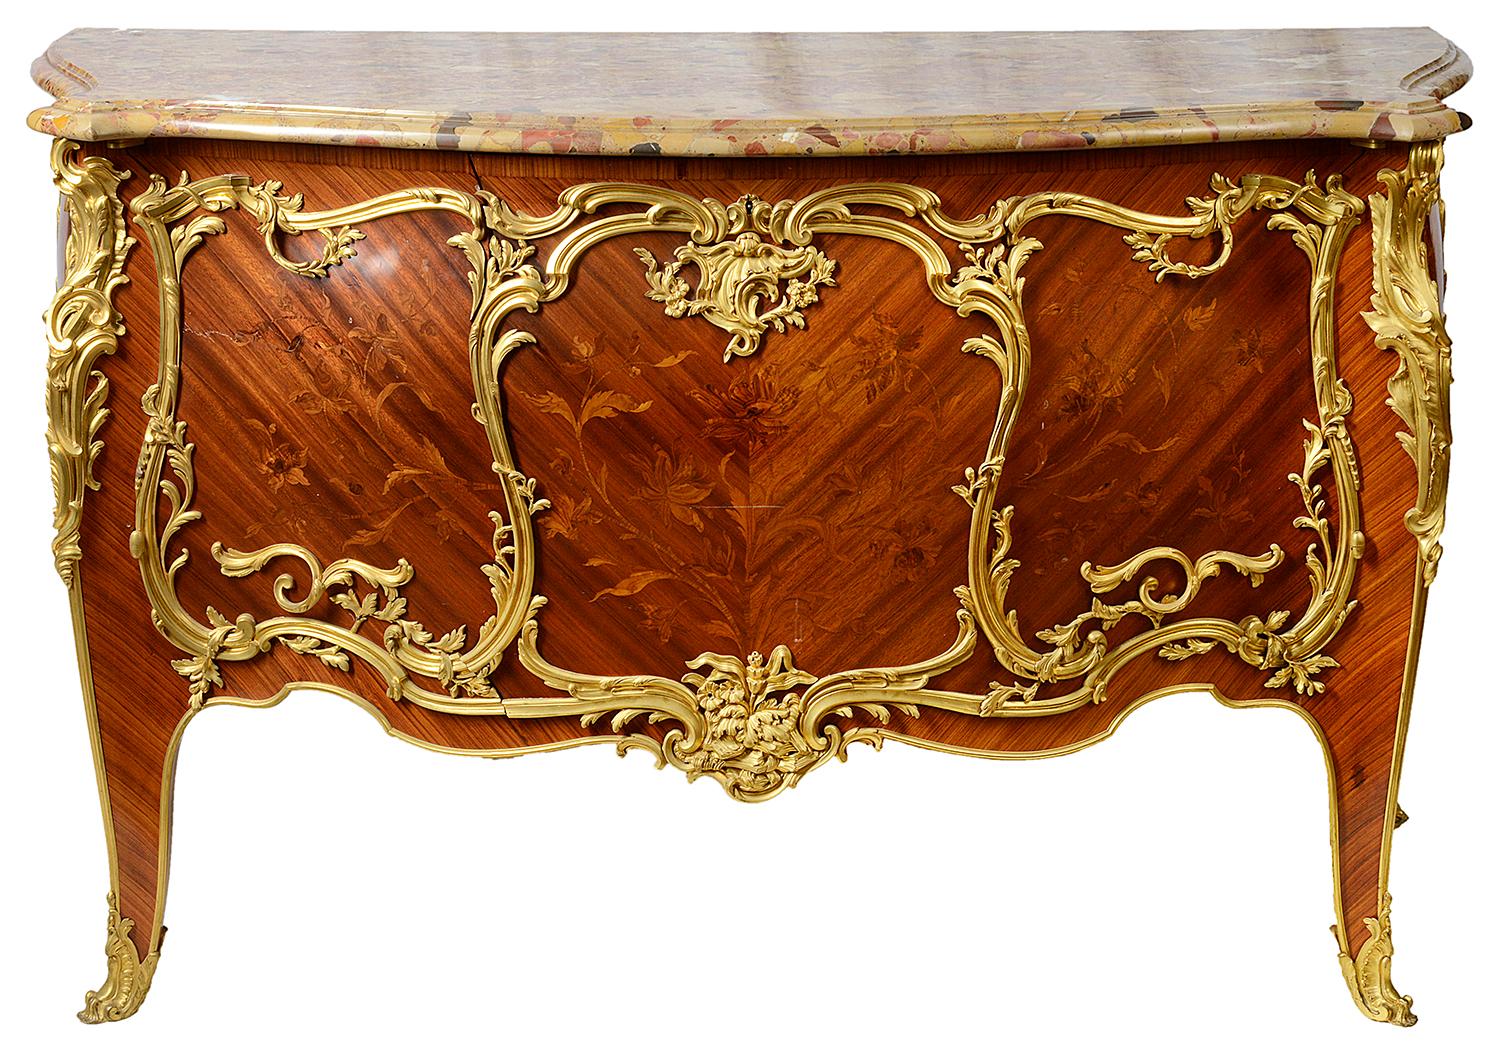 A wonderful quality late 19th century French Louis XVI style marble top bombe shaped commode, having scrolling foliate gilded ormolu mounts, fine marquetry inlaid panels with flowers and leaves, the two doors opening to reveal a shelf